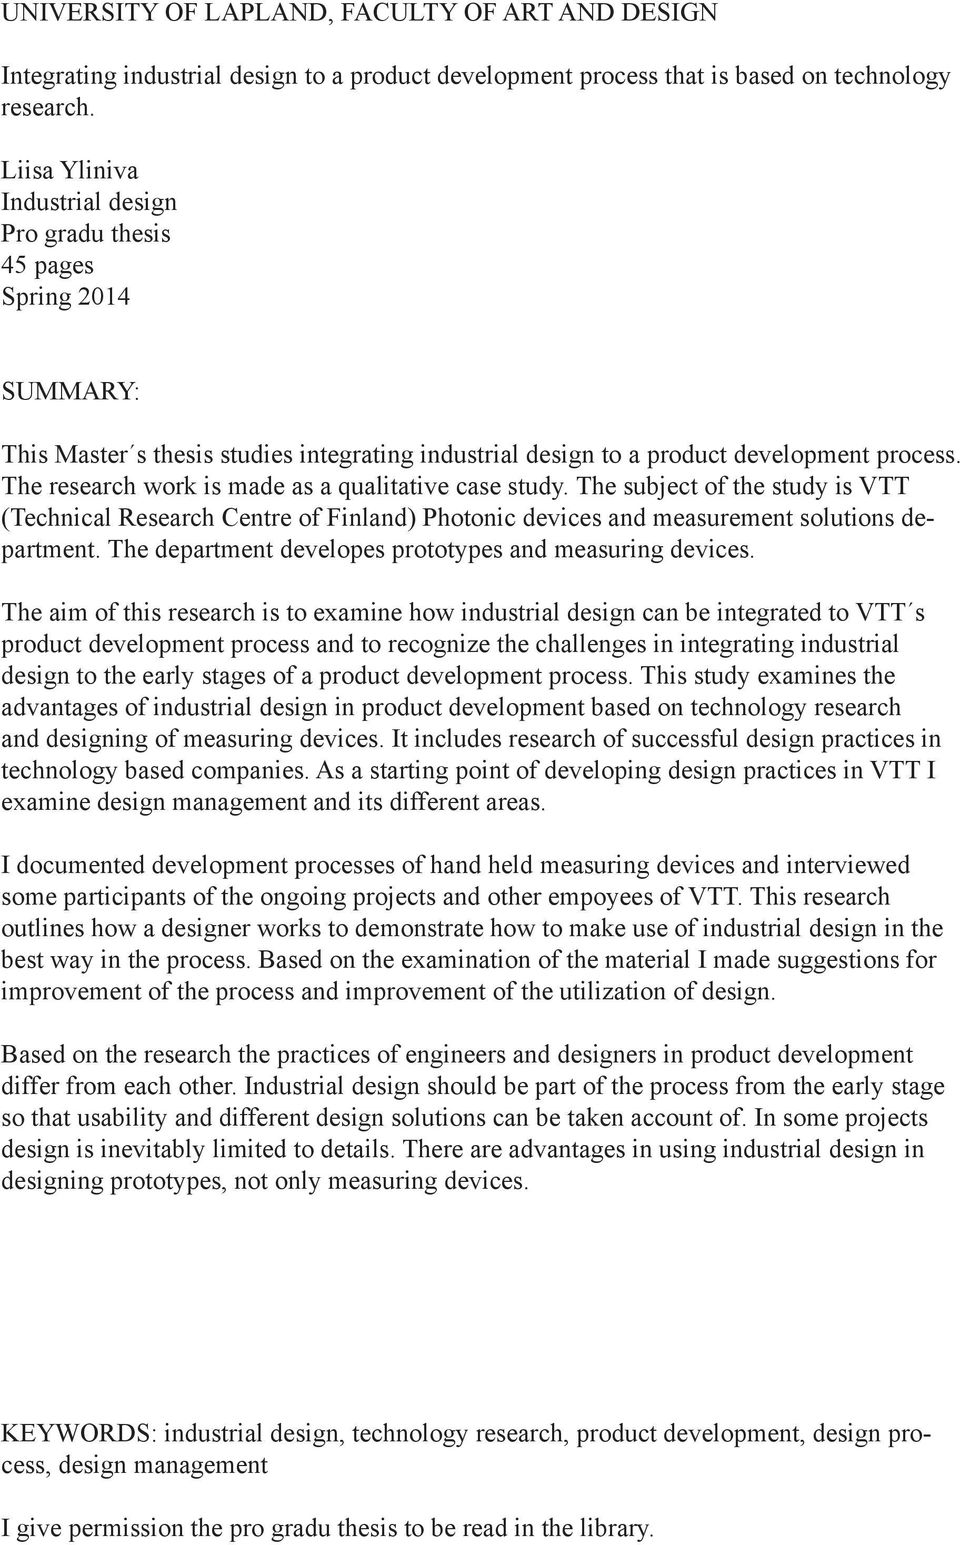 The research work is made as a qualitative case study. The subject of the study is VTT (Technical Research Centre of Finland) Photonic devices and measurement solutions department.